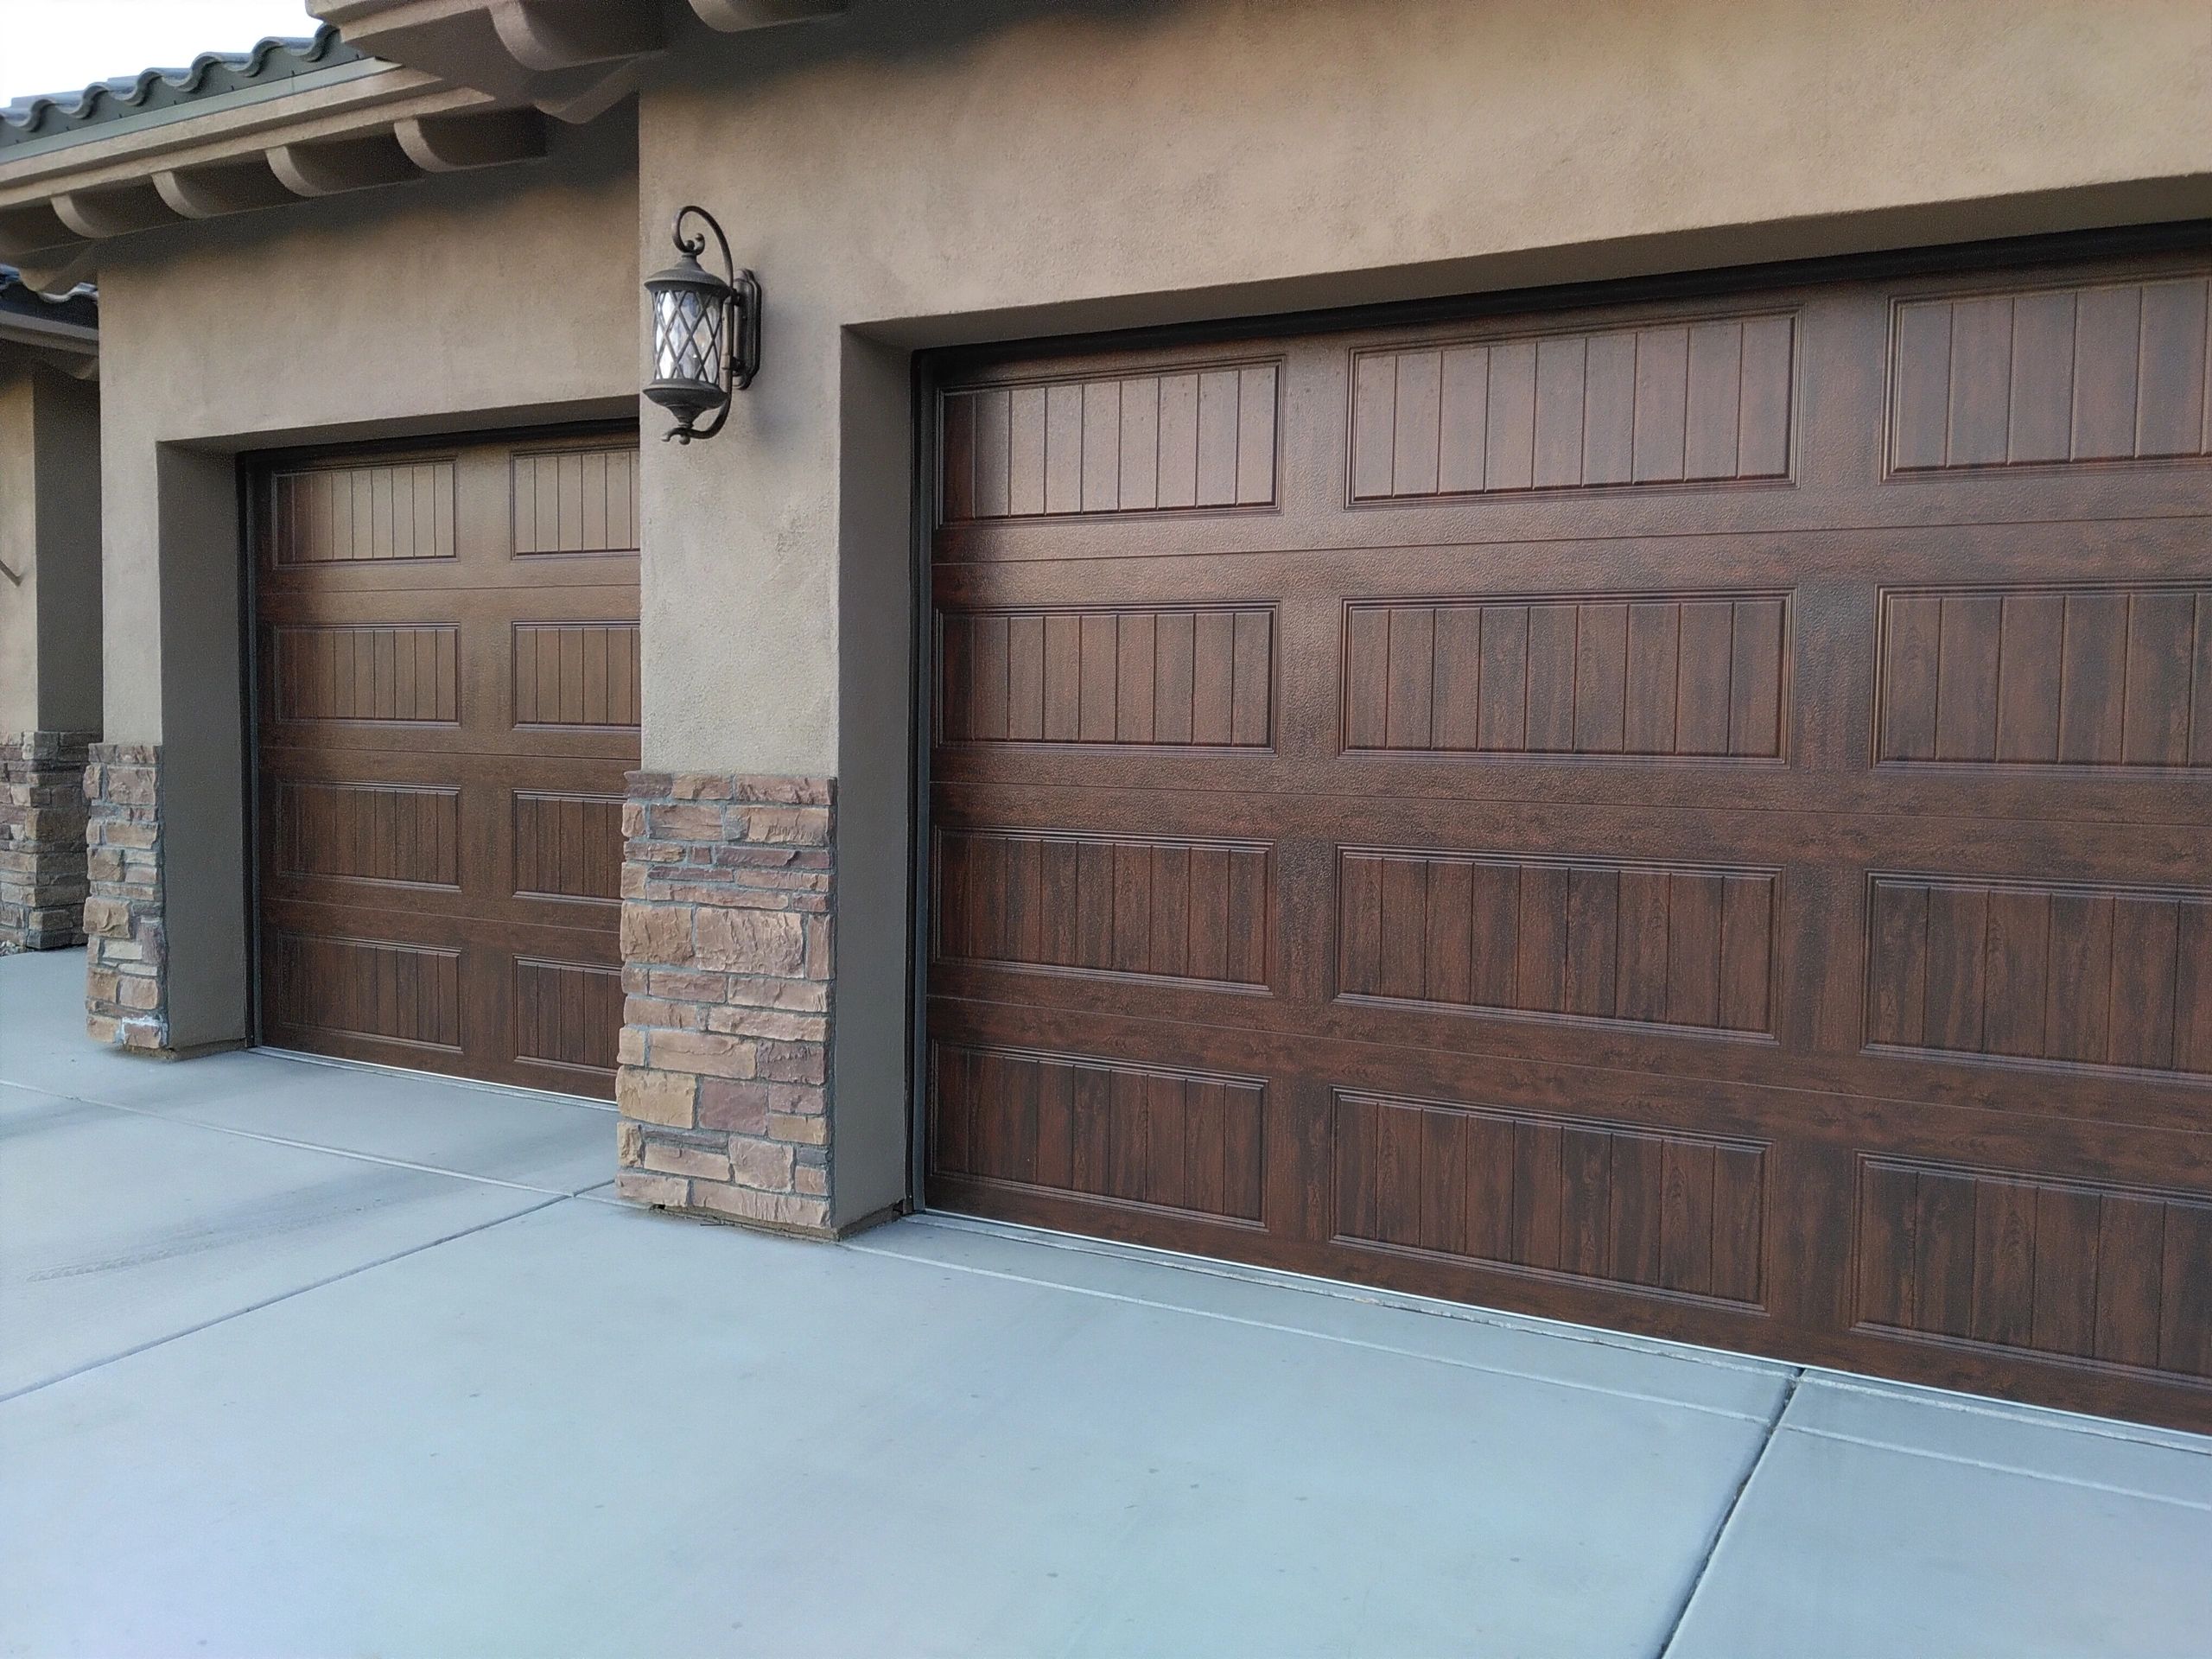 Wood look garage doors with Ranch style configuration, carriage house option. Boulder City NV